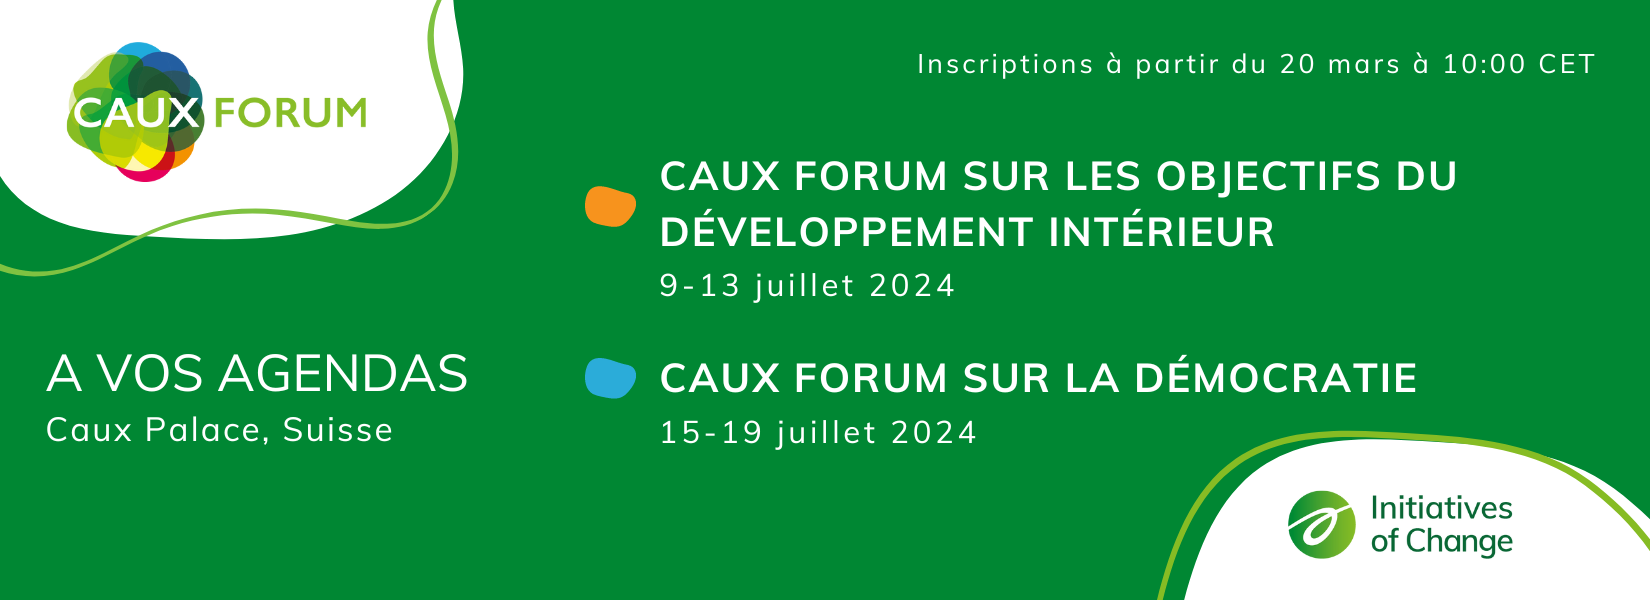 Caux Forum 2024 Save the Date banner FR green